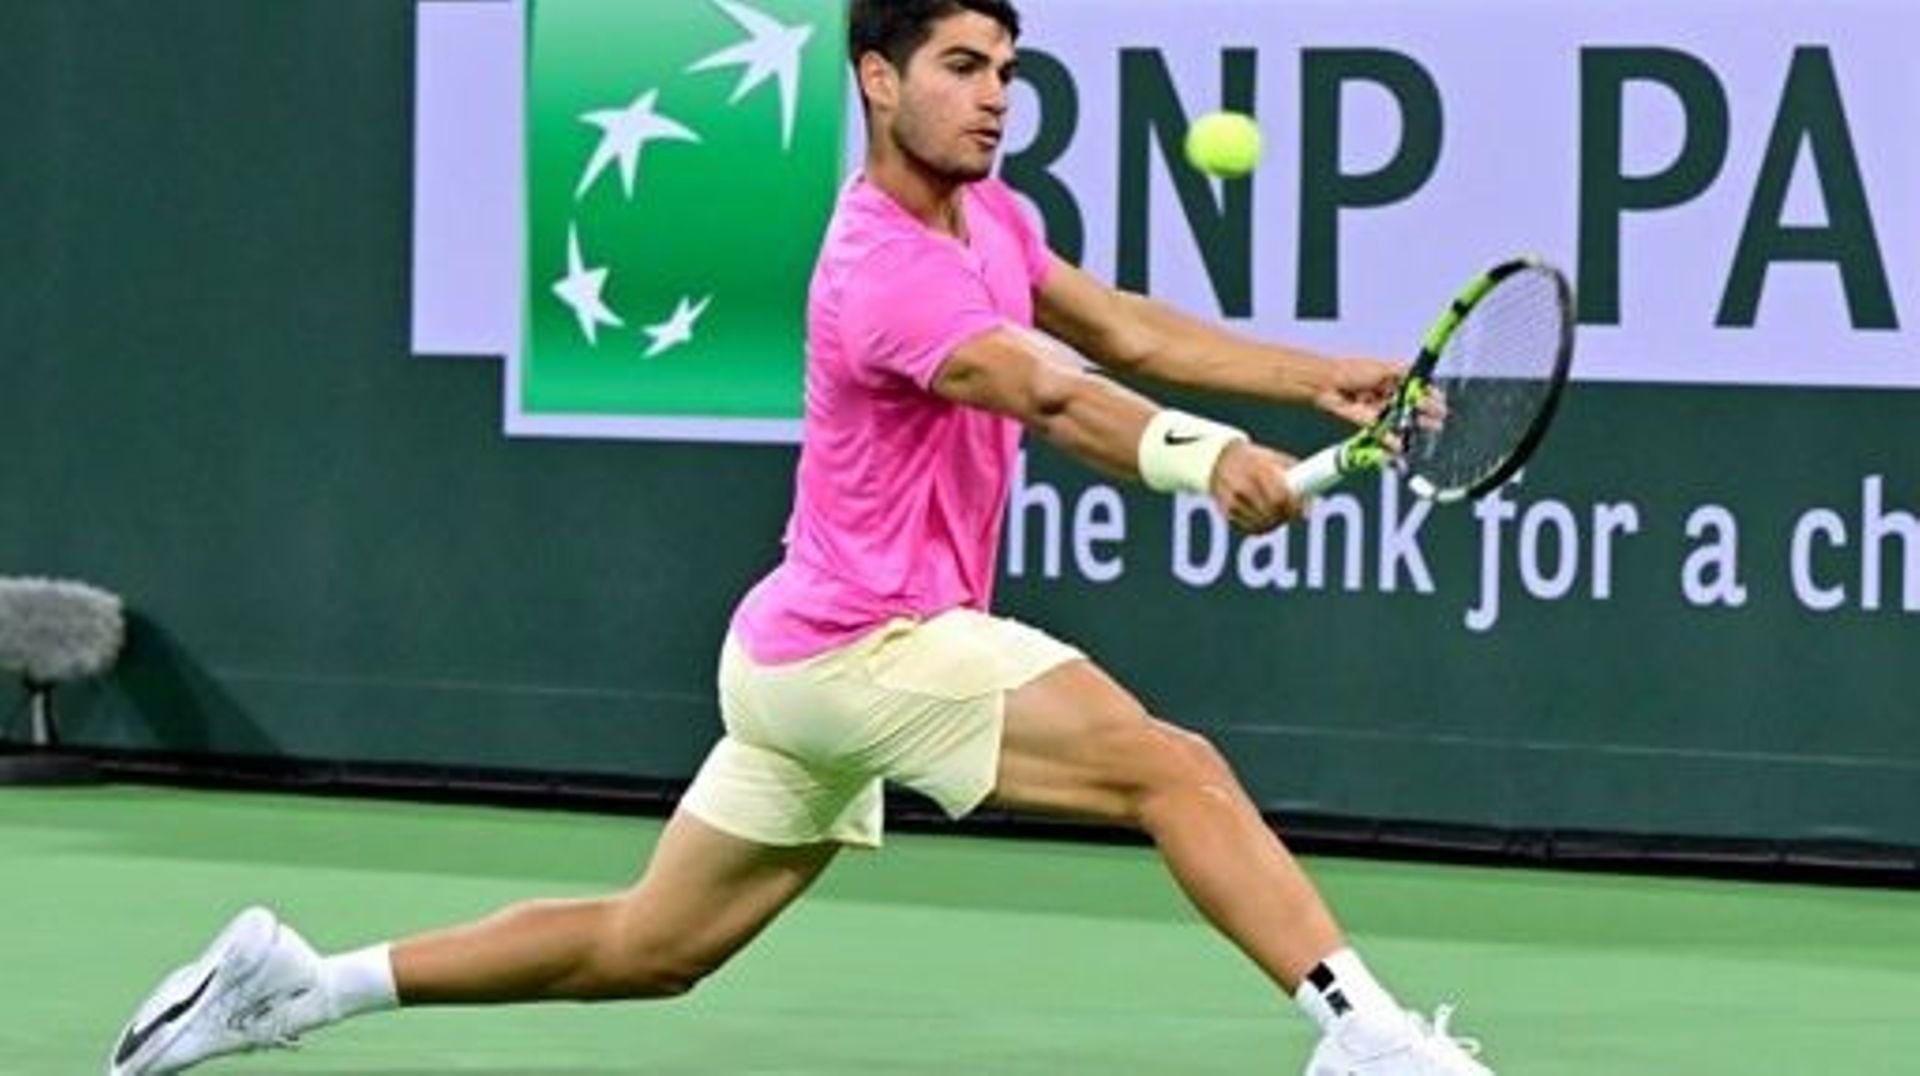 Spain’s Carlos Alcaraz hits a backhand return to Britain’s Jack Draper during their Indian Wells Masters round of 16 tennis match in Indian Wells, California, on March 14, 2023. Frederic J. BROWN / AFP